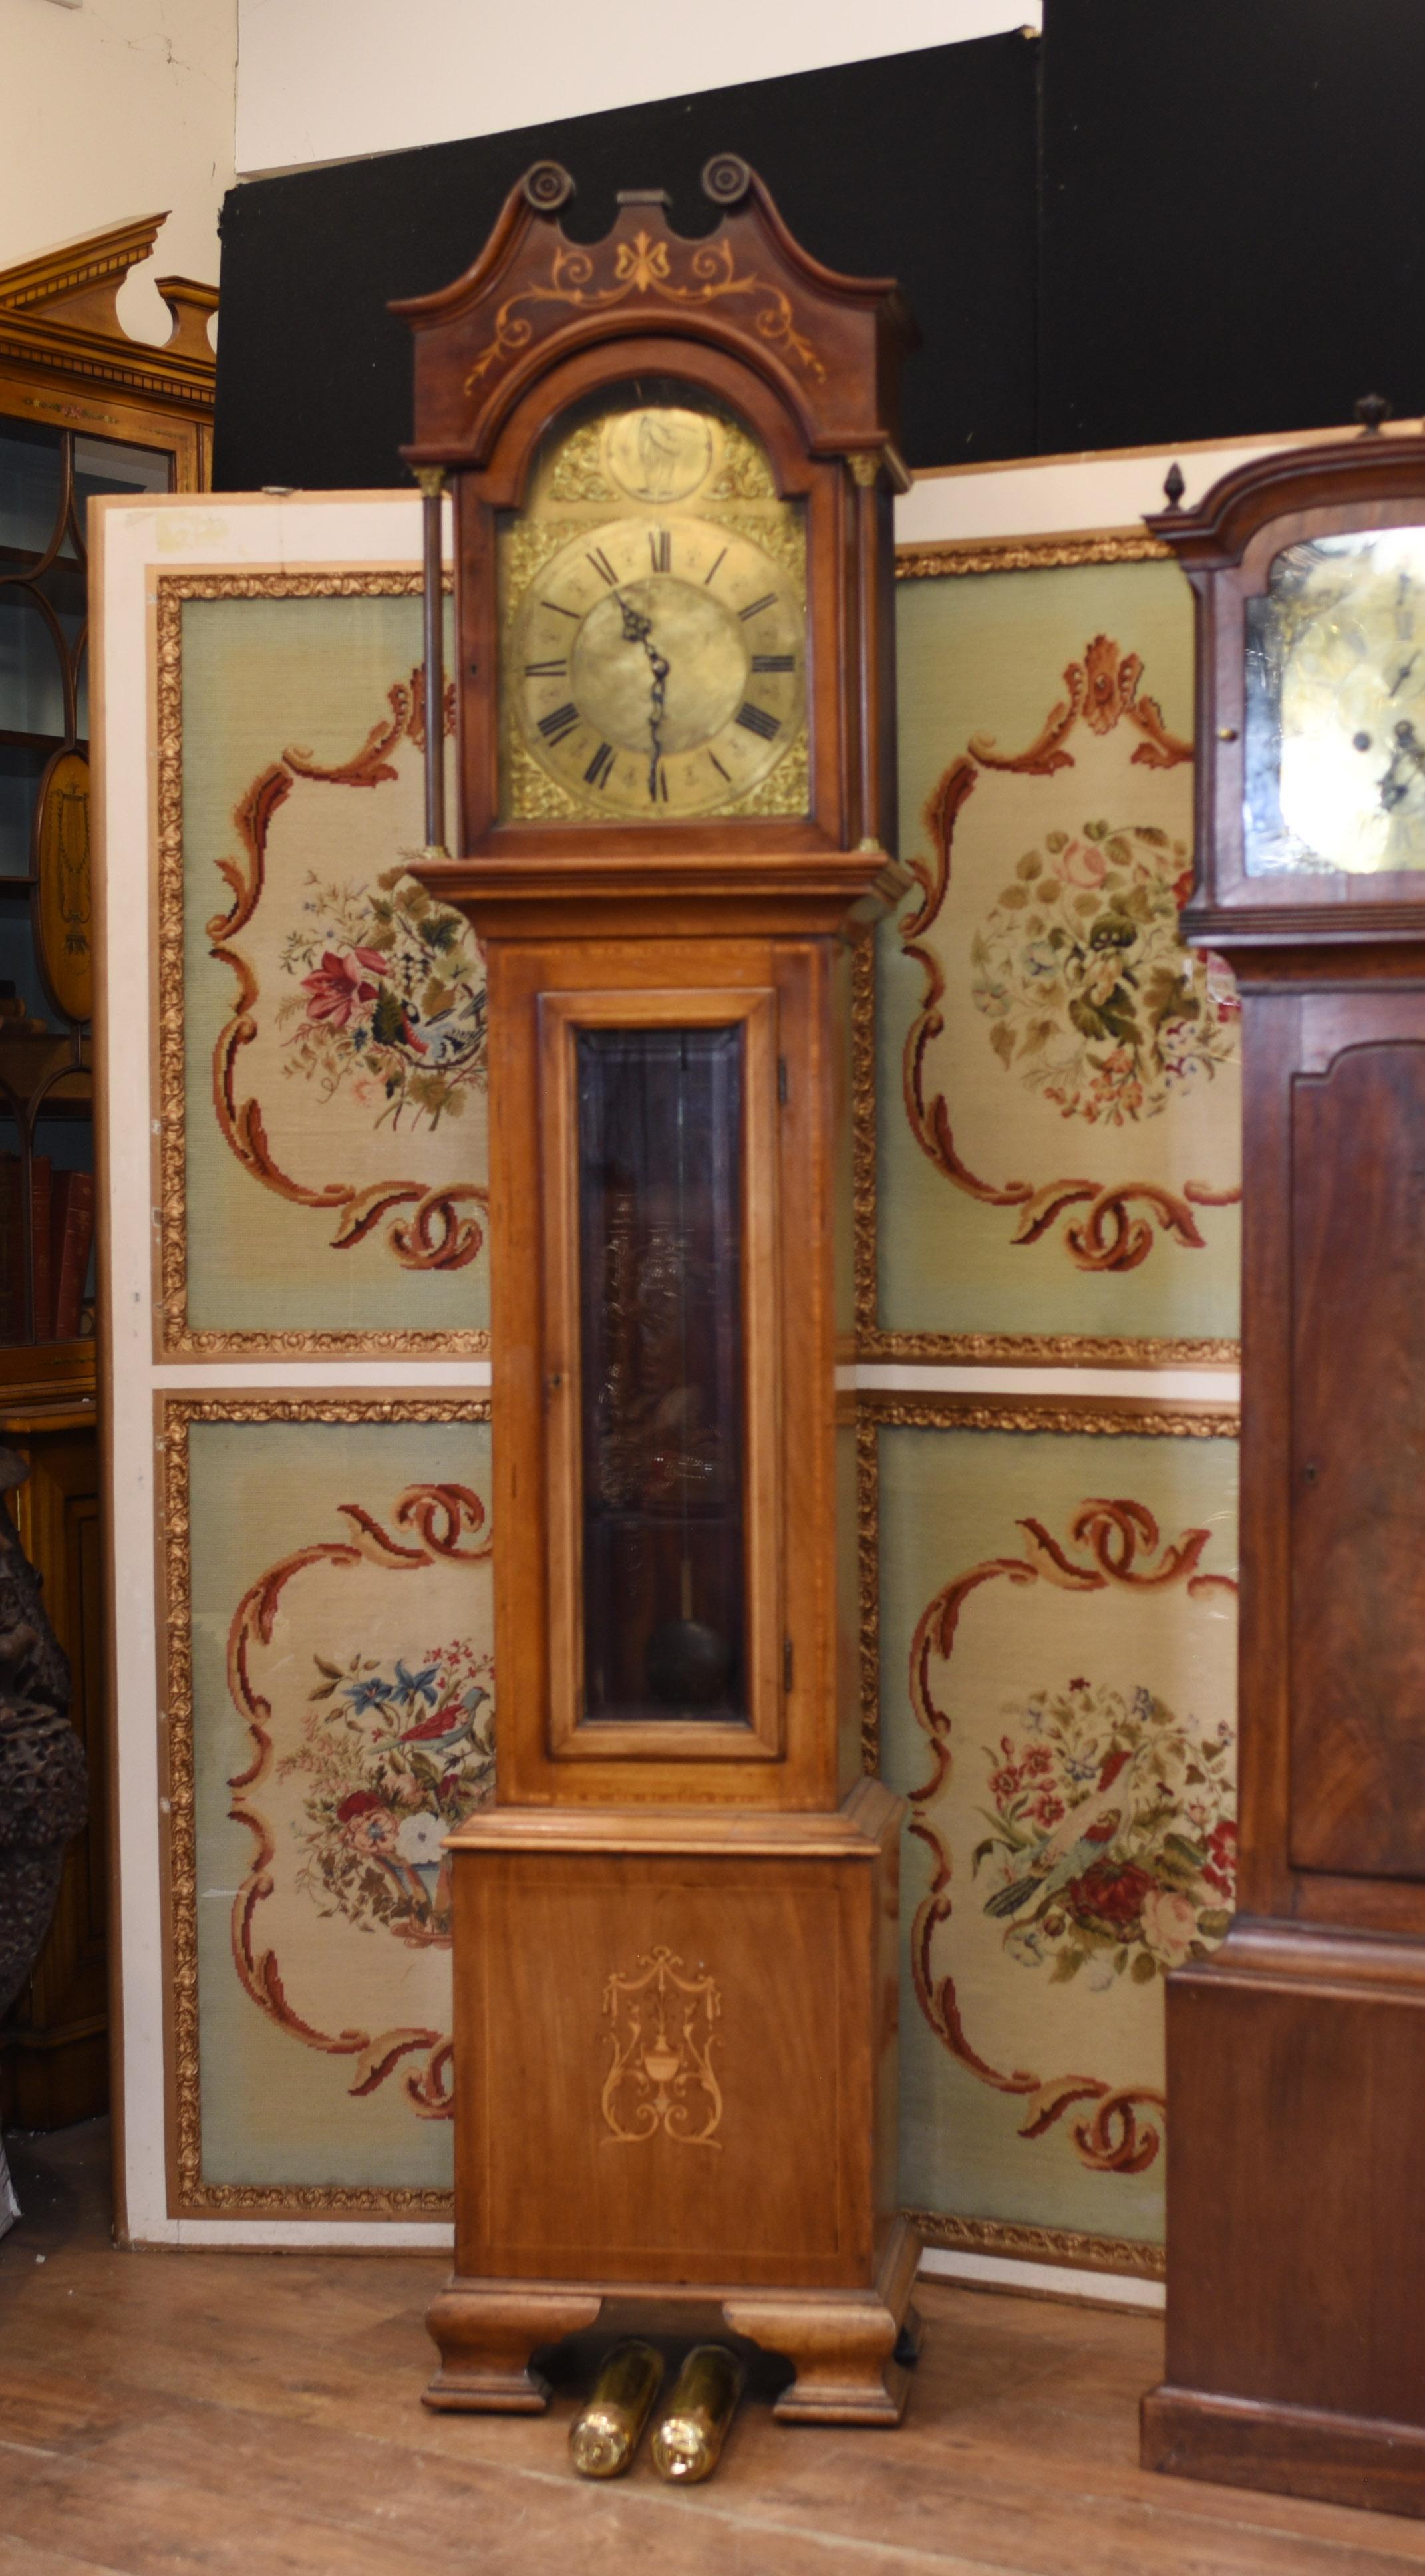 - Gorgeous antique Edwardian grandfather clock we date to circa 1910
- Edwardian inlaid brass
- Intricate marquetry inlay designs
- Viewings available by appointment
- Offered in great shape ready for home use right away
- We ship to every